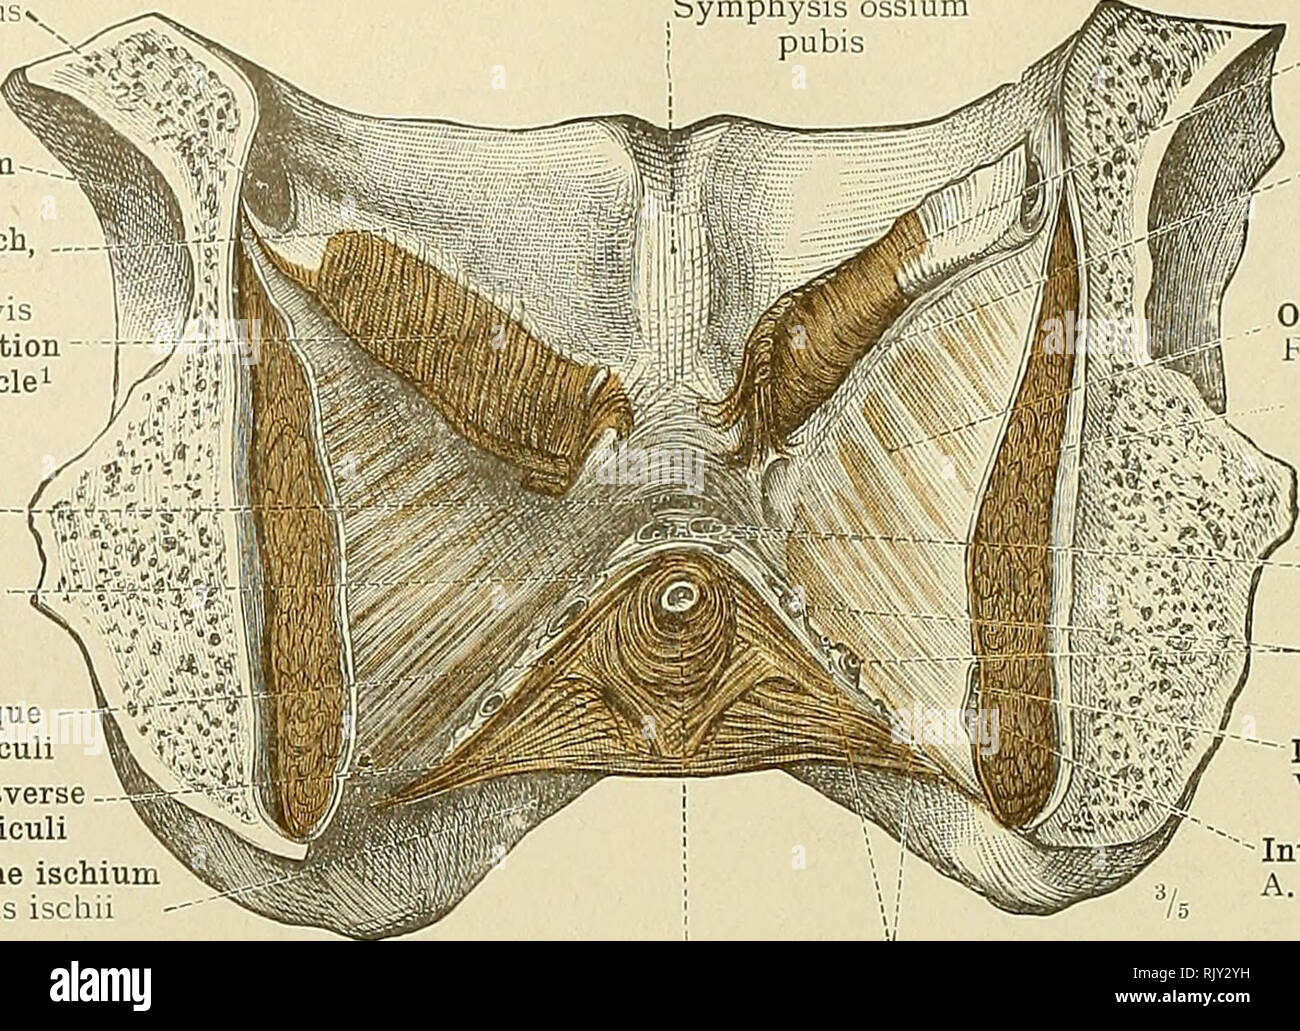 . An atlas of human anatomy for students and physicians. Anatomy. 532 MUSCLES OF THE PERINEUM Obturator canal Canalis obturatorius Acetabulum White line, or *tendinous arch, of the pelvic fascia&quot; Arcus tendineus fascia: pehis Origin of the pubic portion of the levator ani musclei Inferior pubic or subpubic ligament—Lig- arcuatum pubis Transverse ligament of the pelvis-' Lig. transversum pelvis Constrictor or com- I Oblique pressor urethrae or J fasciculi transversus perinei 1 Transverse profundus muscle' 1^ fasciculi Inferior ramus of the ischium Ramus inferior ossis iscliii Pubic symphys Stock Photo